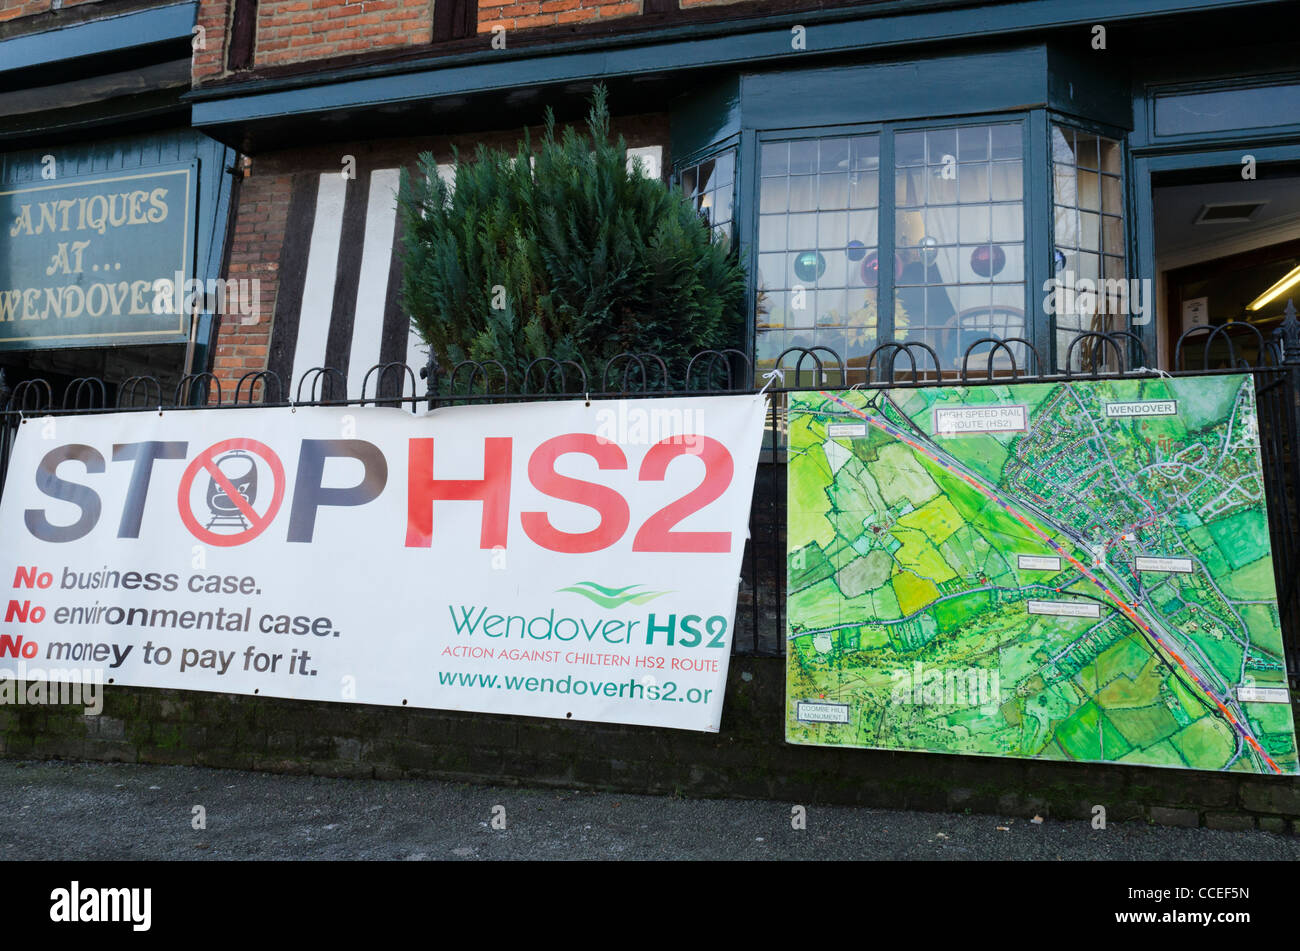 Stop HS2 protest campaign banner and HS2 rail route map in Wendover Bucks UK Stock Photo